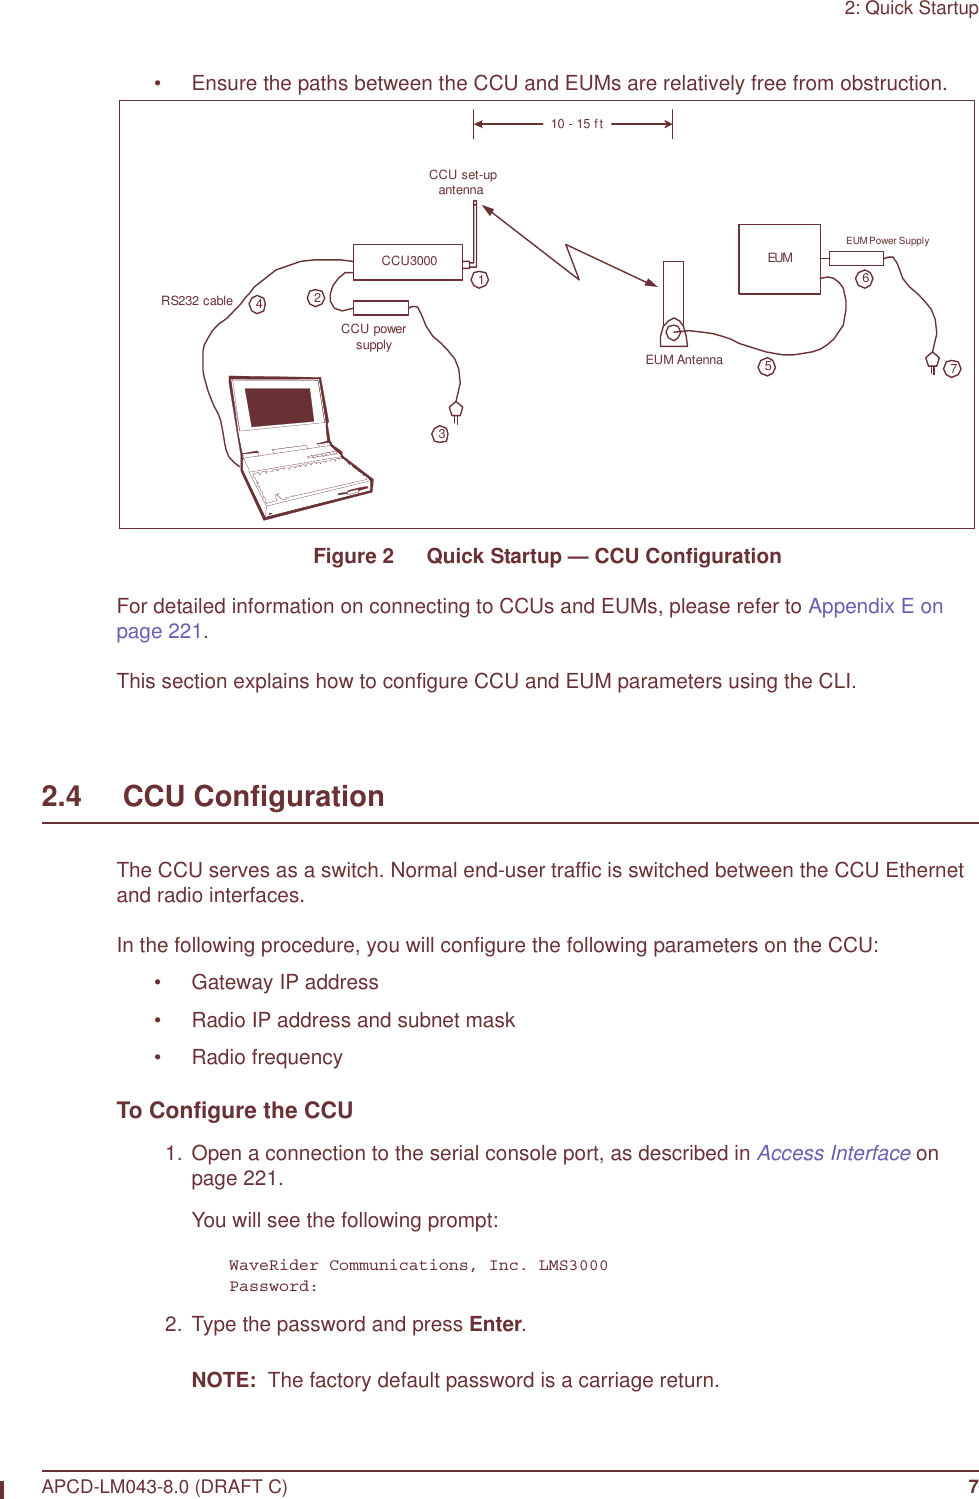 2: Quick StartupAPCD-LM043-8.0 (DRAFT C) 7• Ensure the paths between the CCU and EUMs are relatively free from obstruction.Figure 2   Quick Startup — CCU ConfigurationFor detailed information on connecting to CCUs and EUMs, please refer to Appendix E on page 221.This section explains how to configure CCU and EUM parameters using the CLI.2.4     CCU ConfigurationThe CCU serves as a switch. Normal end-user traffic is switched between the CCU Ethernet and radio interfaces.In the following procedure, you will configure the following parameters on the CCU:• Gateway IP address• Radio IP address and subnet mask• Radio frequencyTo Configure the CCU  1.  Open a connection to the serial console port, as described in Access Interface on page 221.You will see the following prompt:WaveRider Communications, Inc. LMS3000Password:  2. Type the password and press Enter.NOTE:  The factory default password is a carriage return.CCU3000RS232 cableCCU set-upantennaCCU powersupplyEUMEUM AntennaEUM Power Supply123456710 - 15 ft